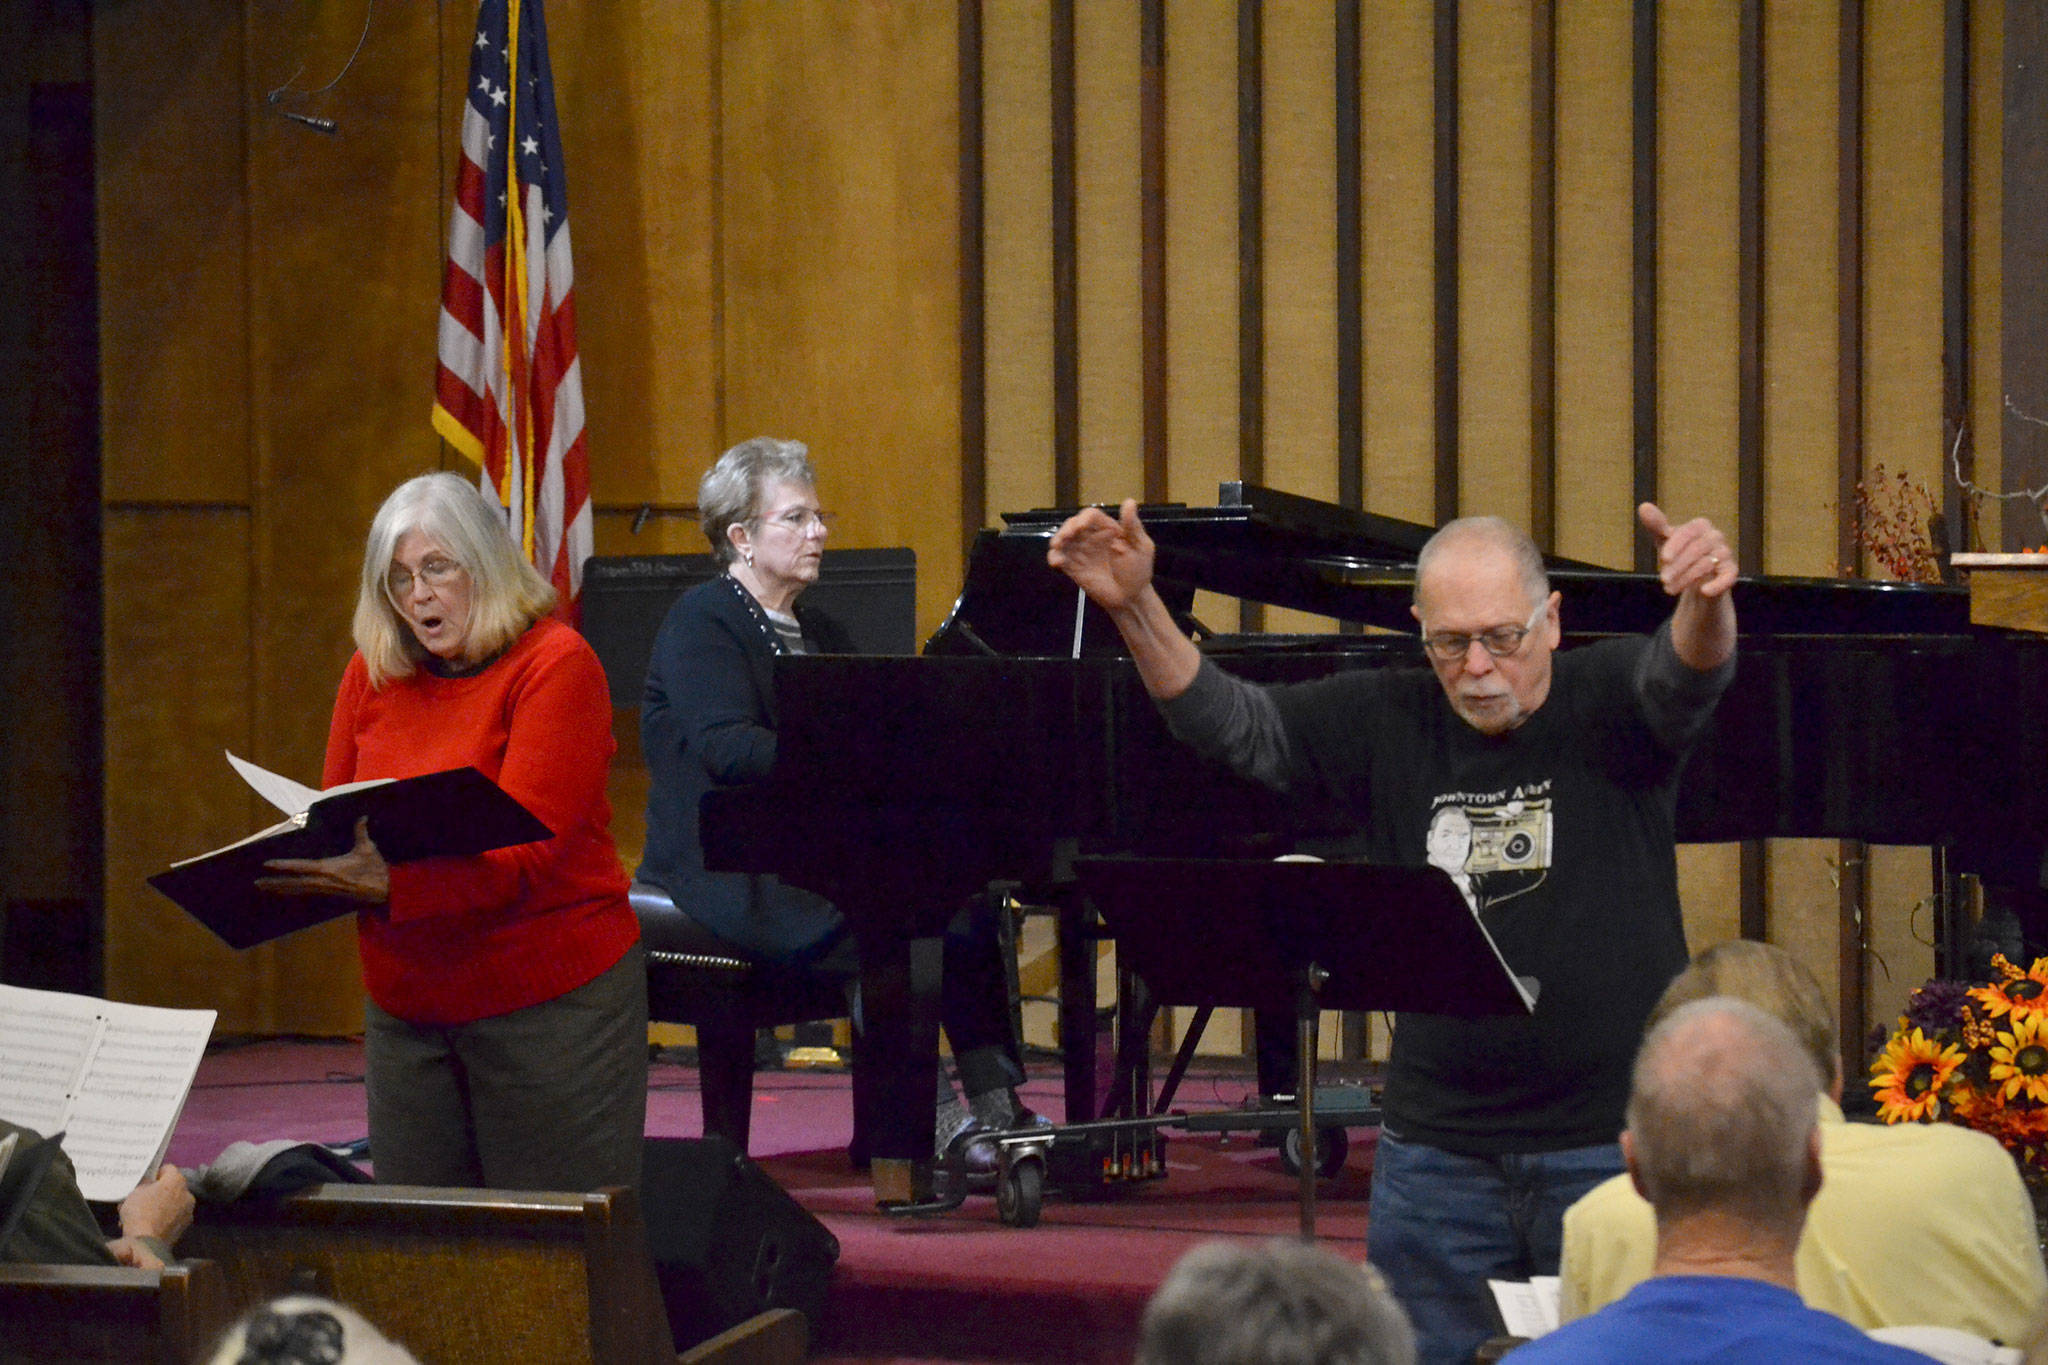 Gary McRoberts directs the Sequim Community Chorus as Patty Shoop sings a solo on “In the bleak mid-winter,” and Linda Grubbs plays piano. Sequim Gazette photo by Matthew Nash